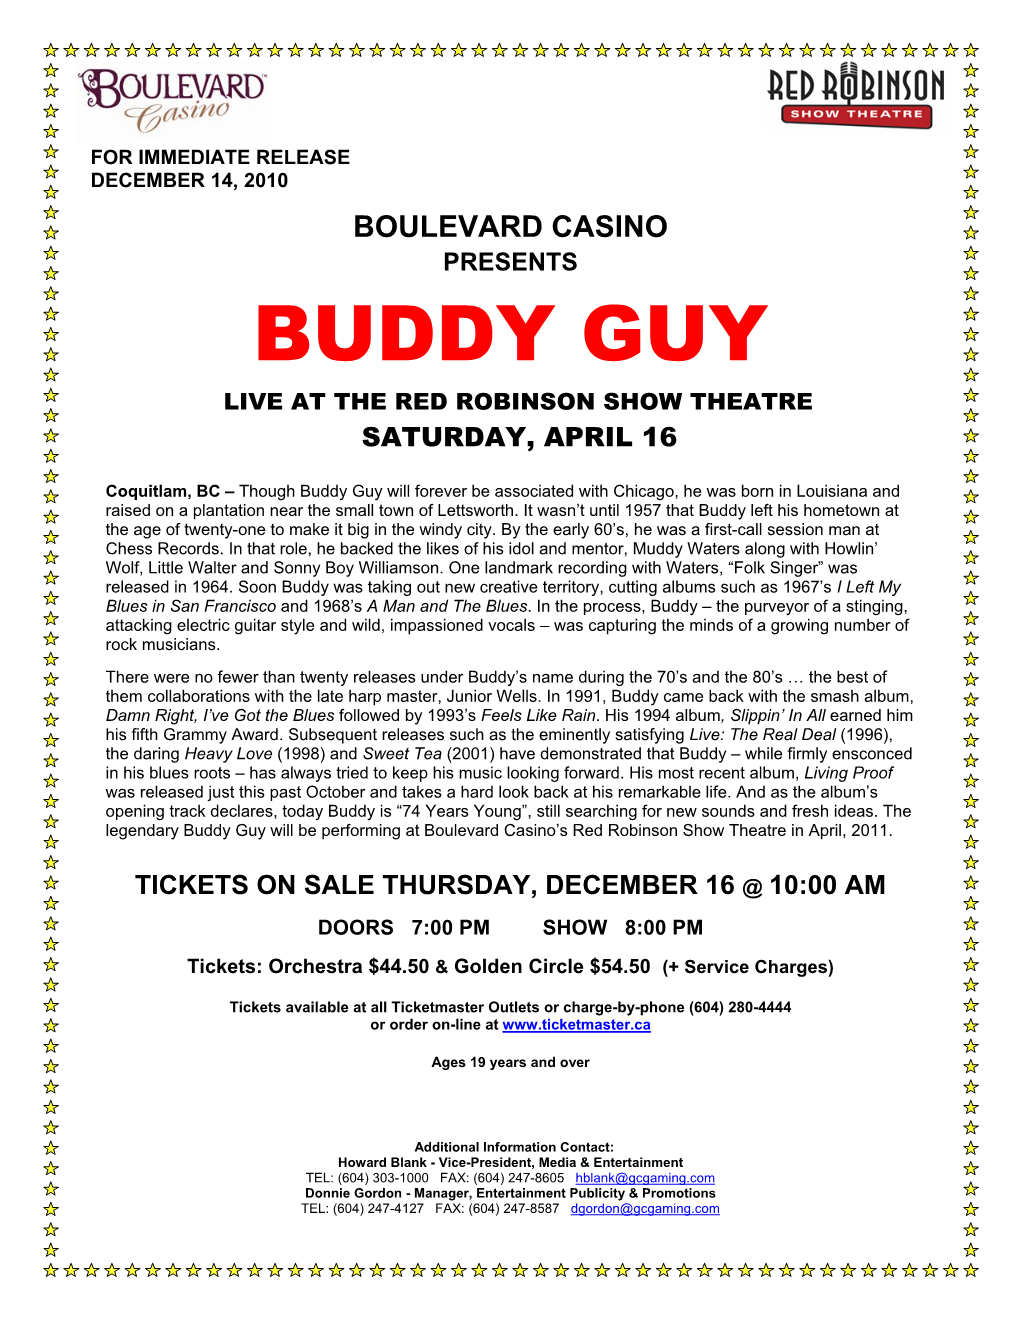 Buddy Guy Live at the Red Robinson Show Theatre